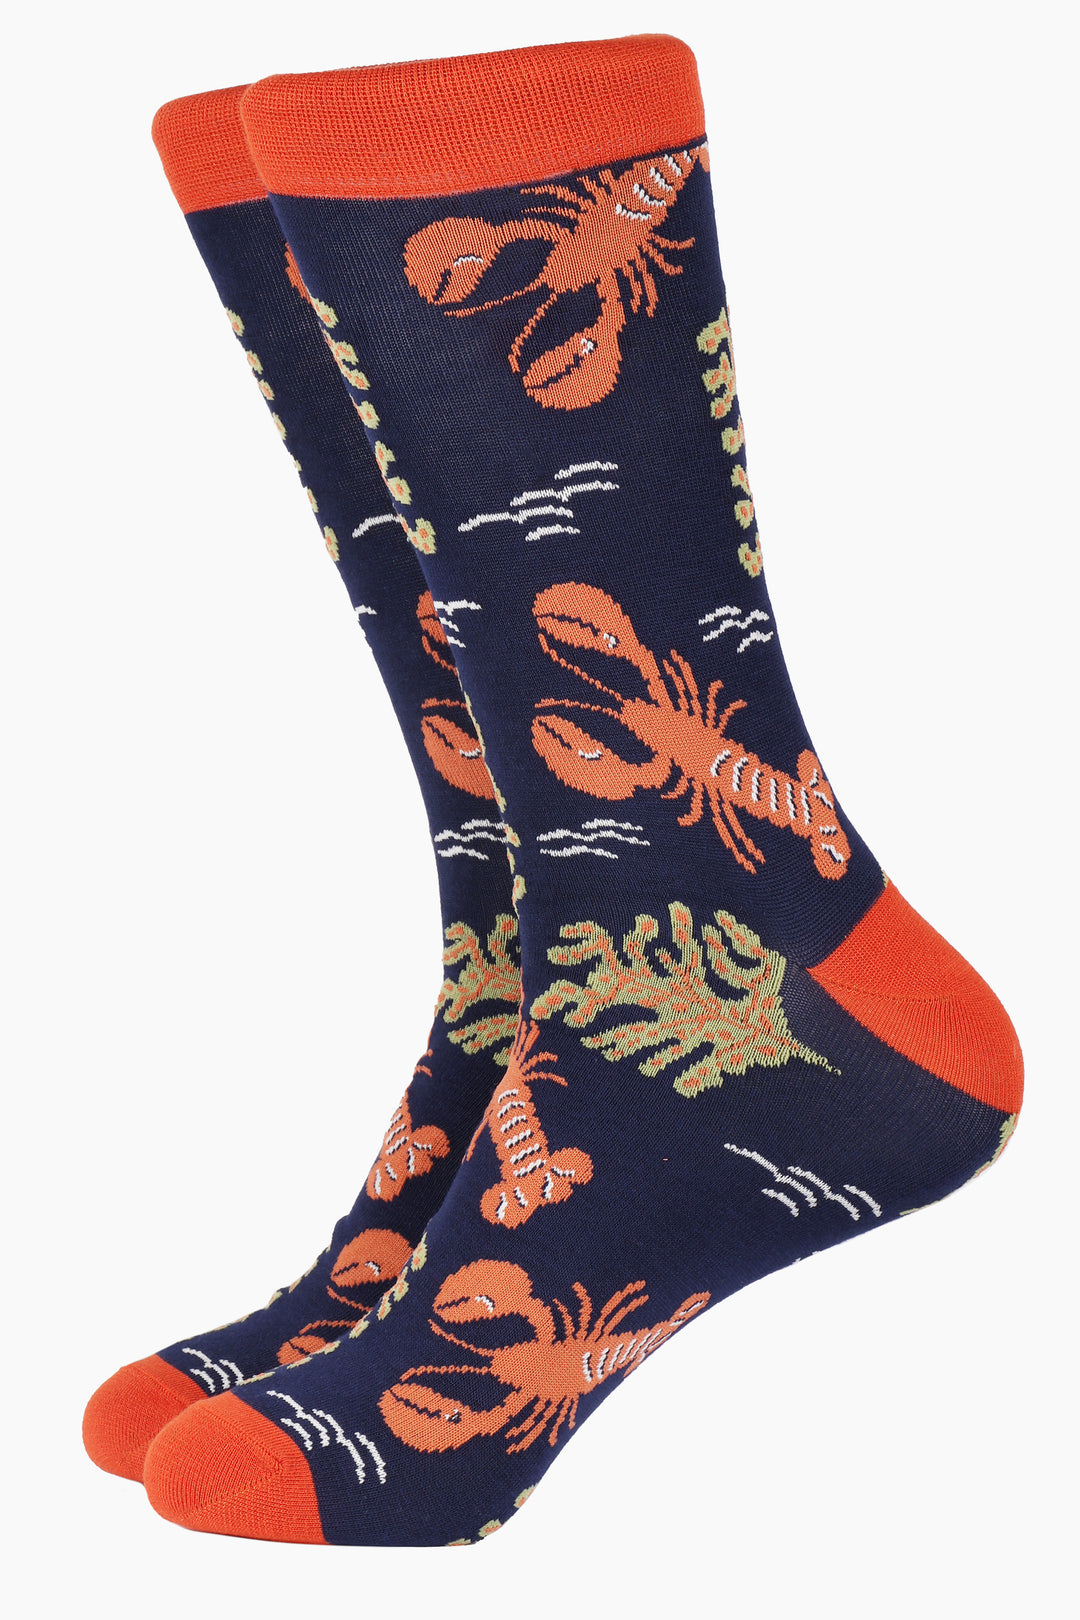 navy blue bamboo socks with an all over pattern of prange lobsters and coral plant life